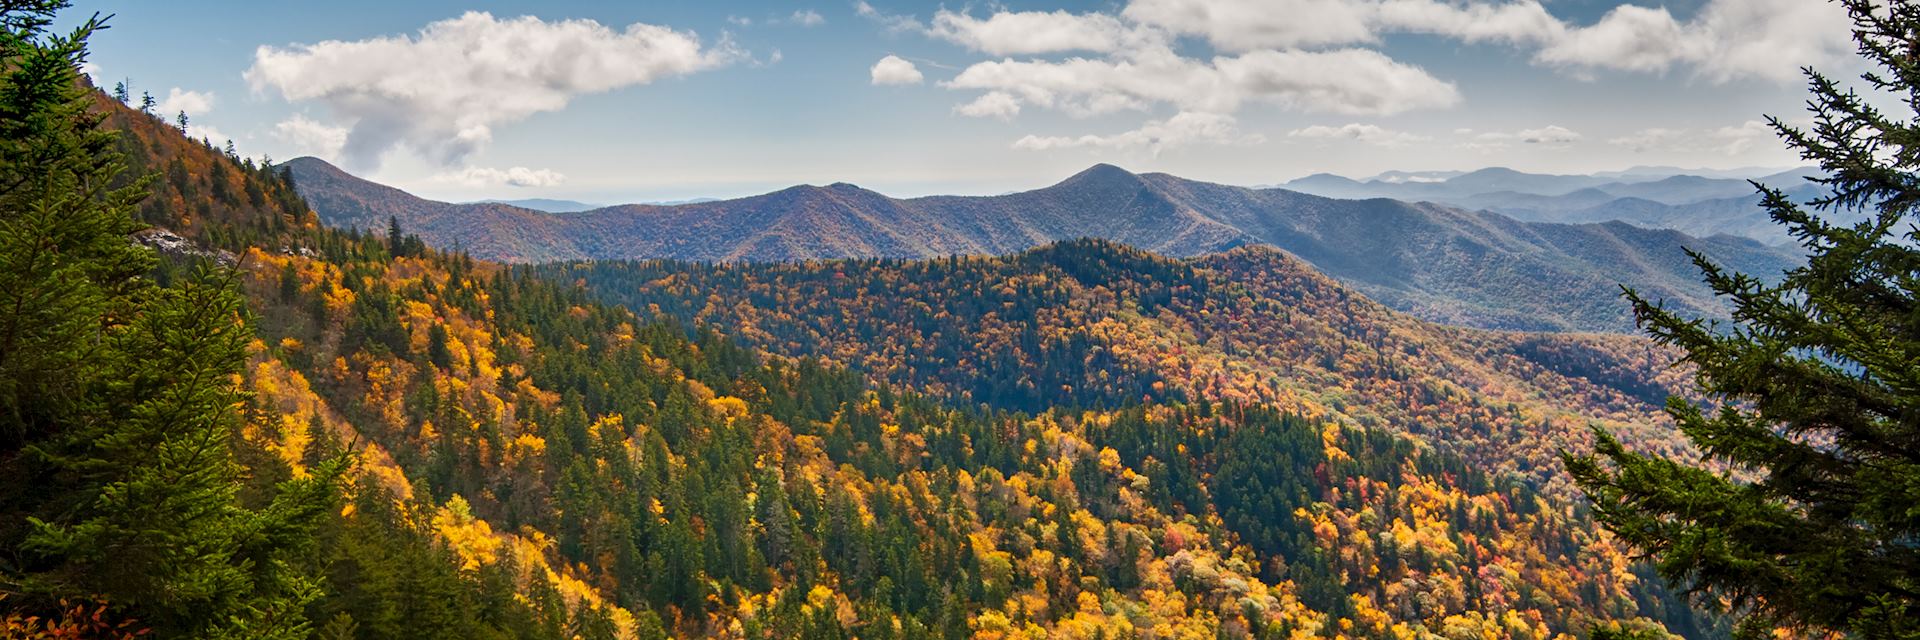 Mountains above the Blue Ridge Parkway